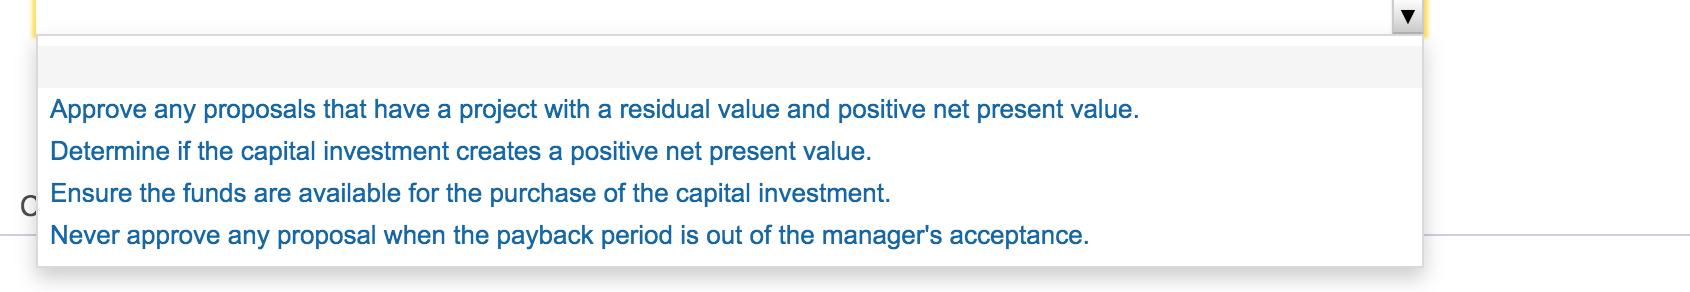 Approve any proposals that have a project with a residual value and positive net present value. Determine if the capital inve